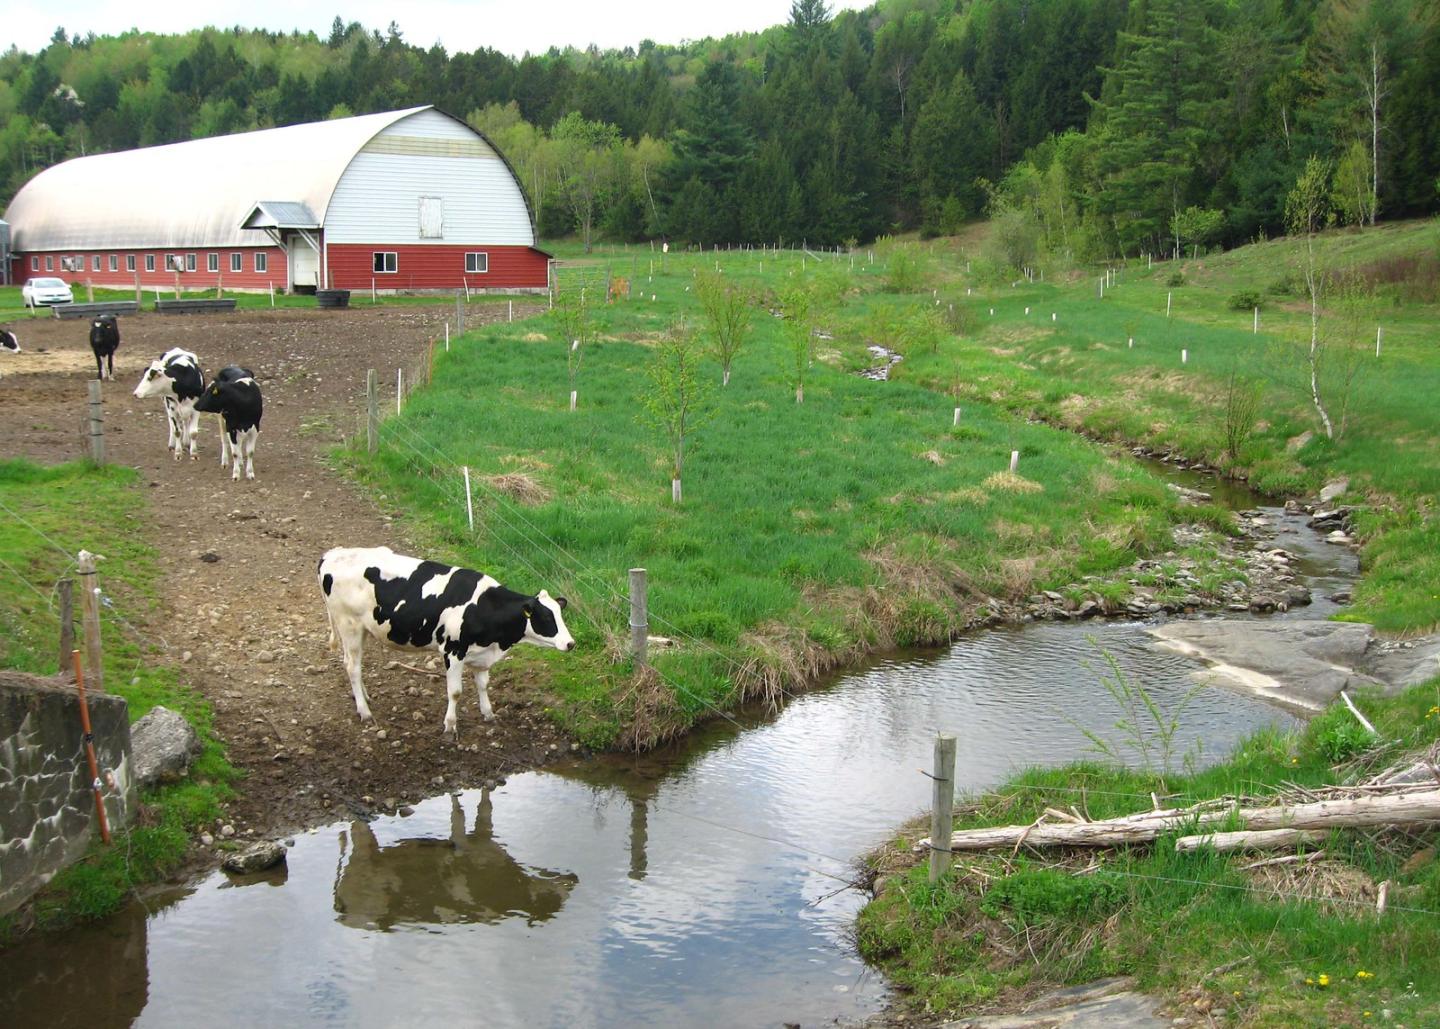 Cows on a farm, approaching a reflective stream.